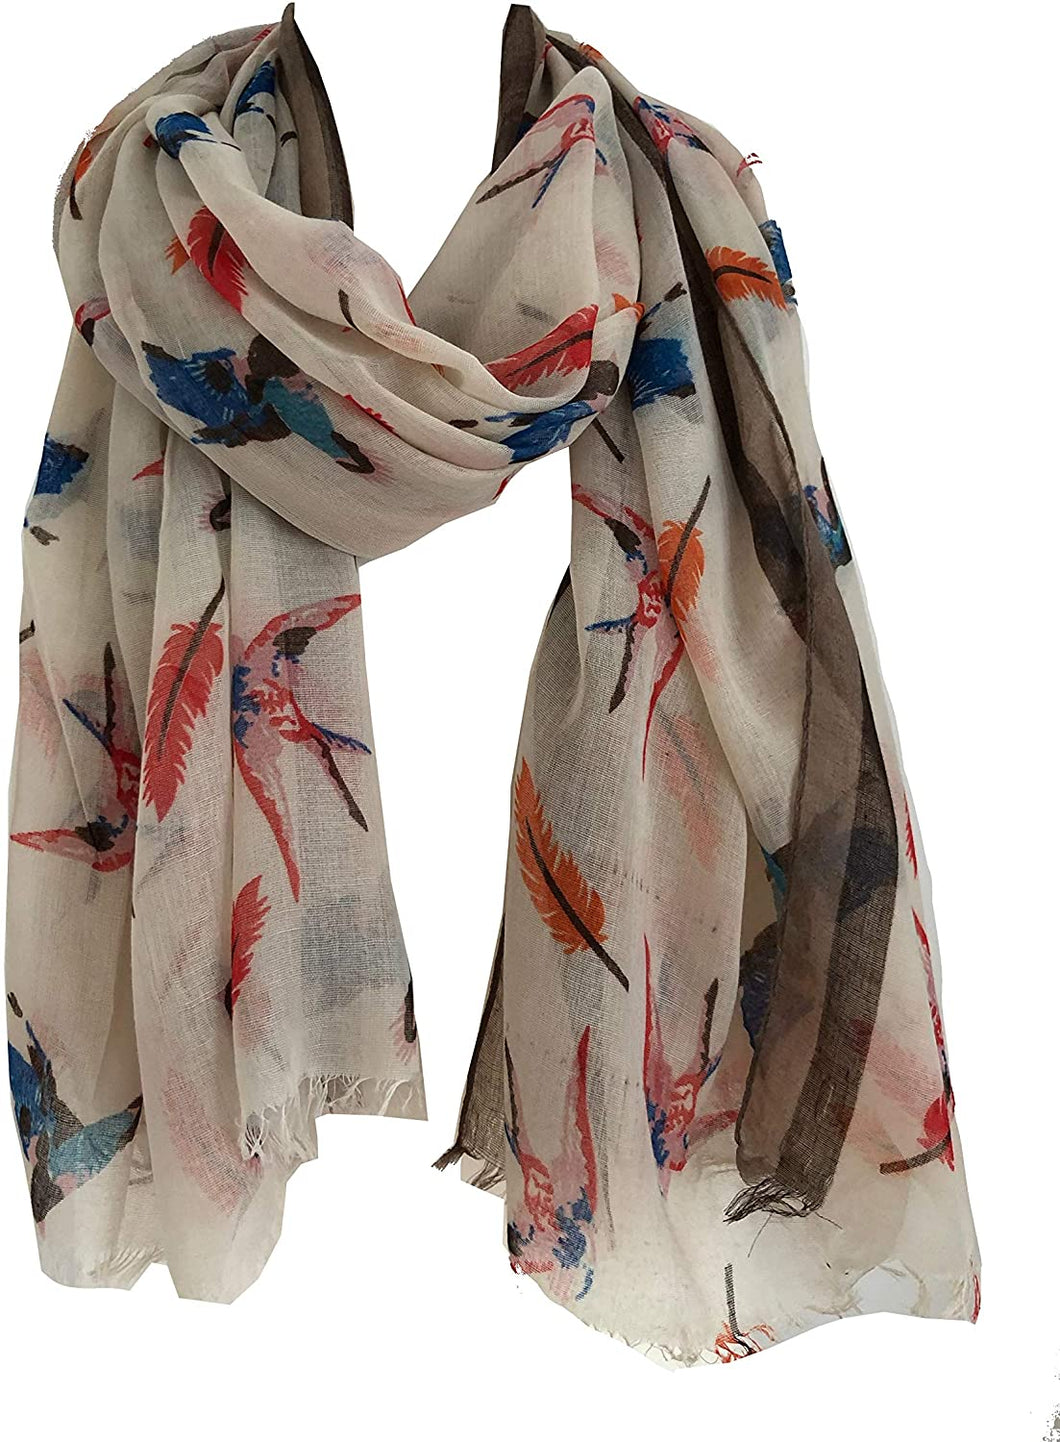 Pamper Yourself Now Beige with Light Brown Edge Swallow and Feather Scarf Multi Coloured Oversized Soft wrap with Frayed Edge